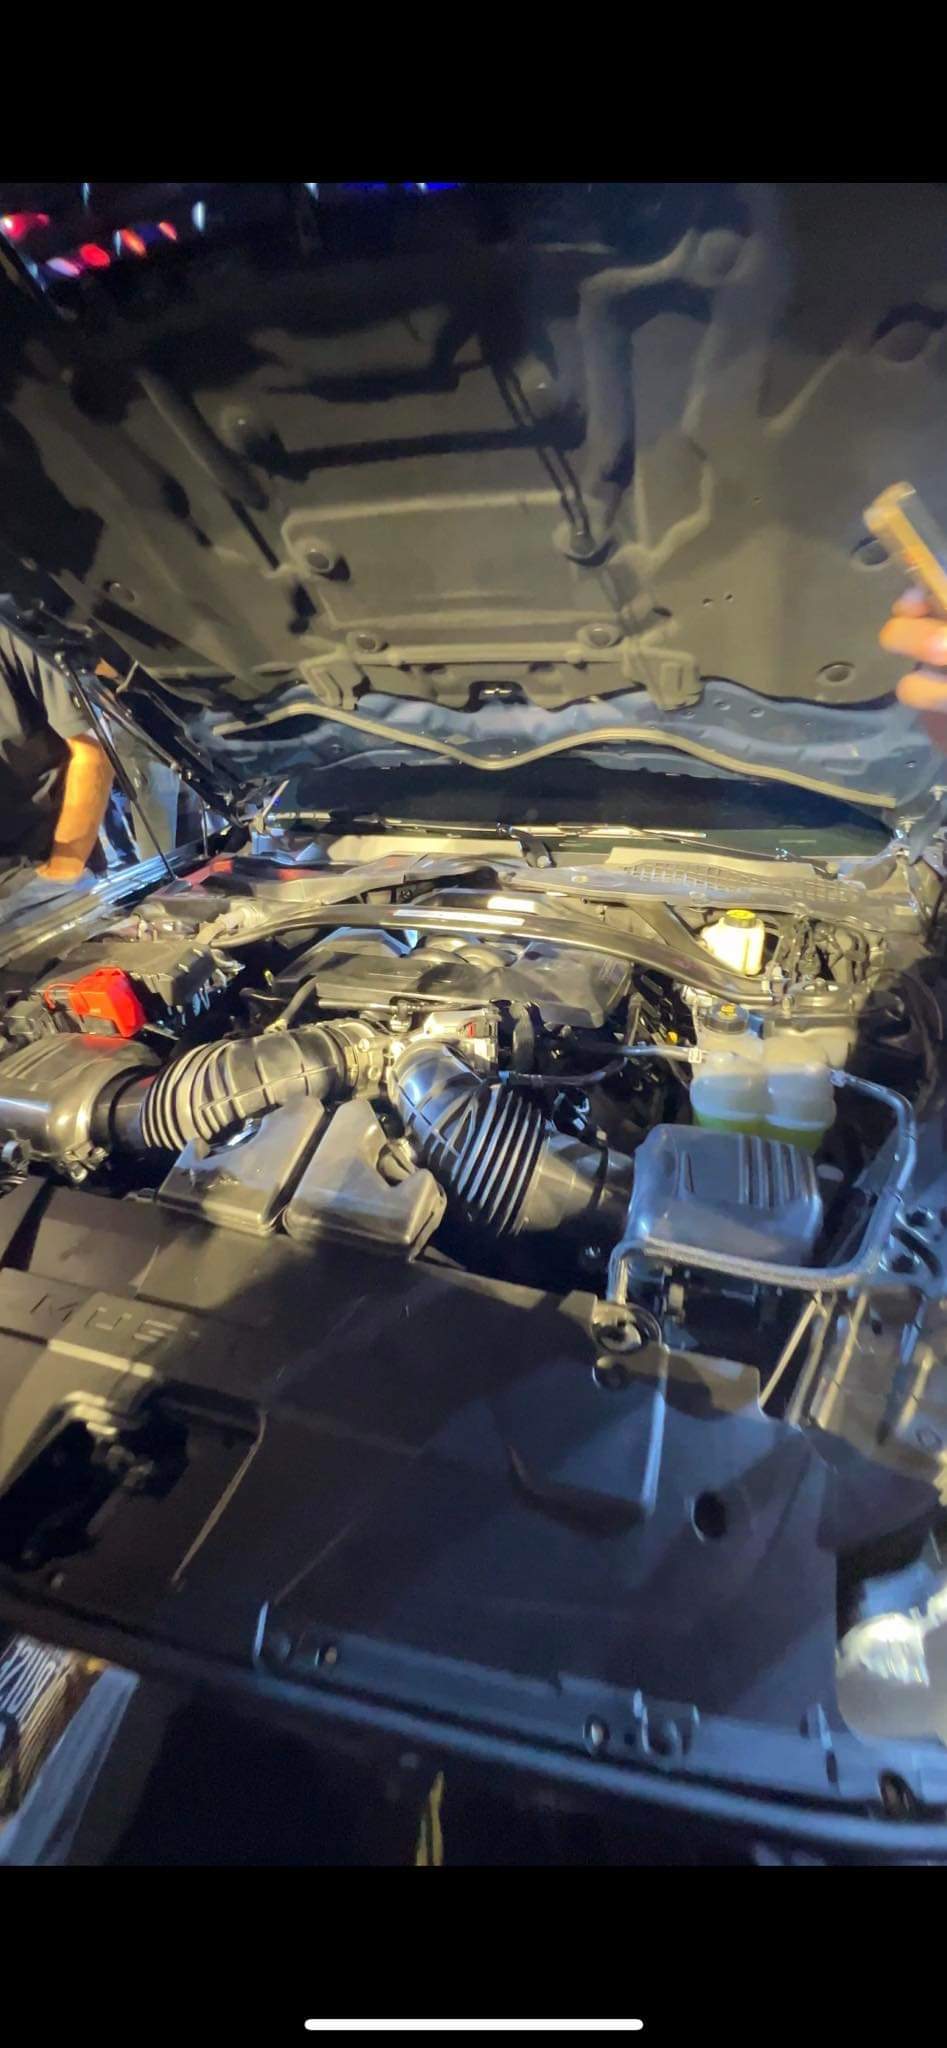 S650 Mustang Live underhood 5.0 Coyote Engine pic found FB_IMG_1663240087708